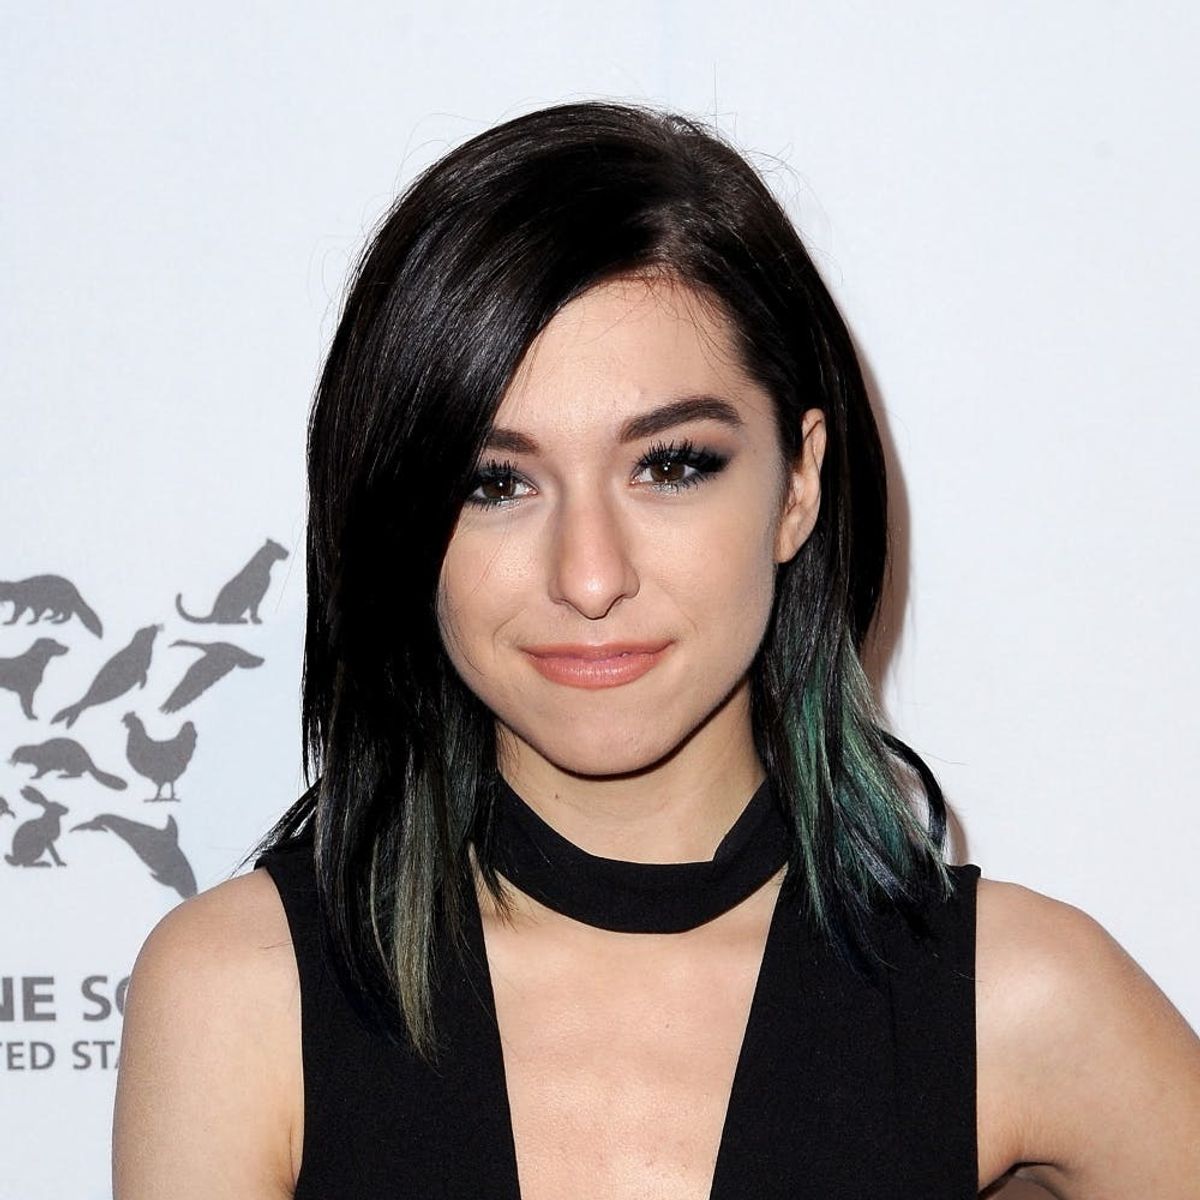 Adam Levine Offered to Pay for Christina Grimmie’s Funeral